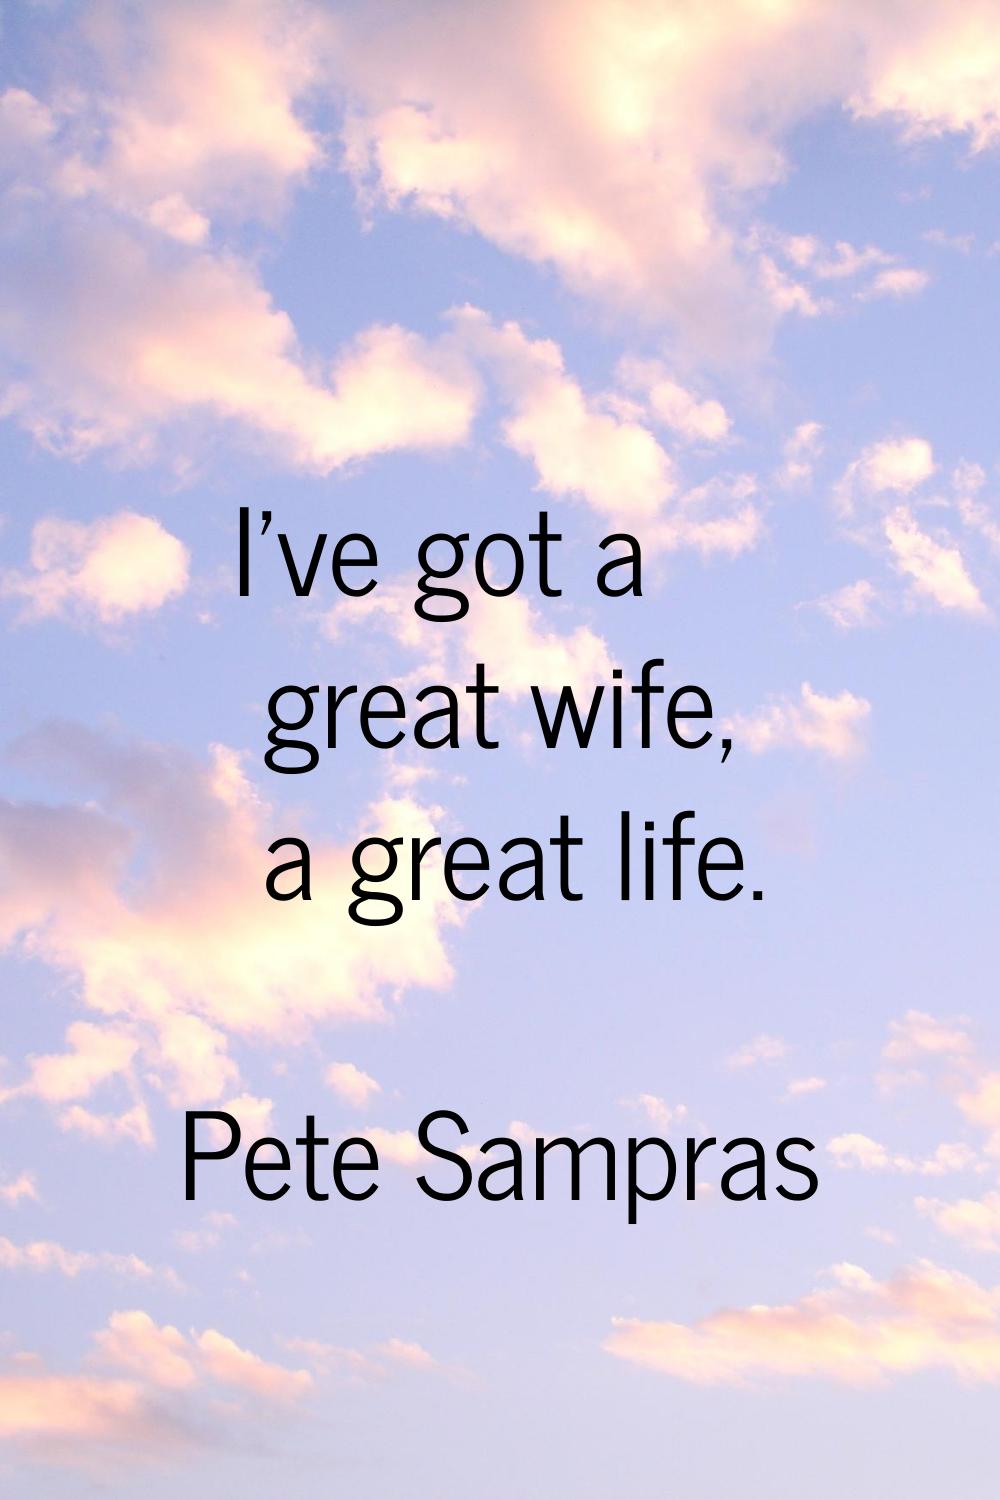 I've got a great wife, a great life.